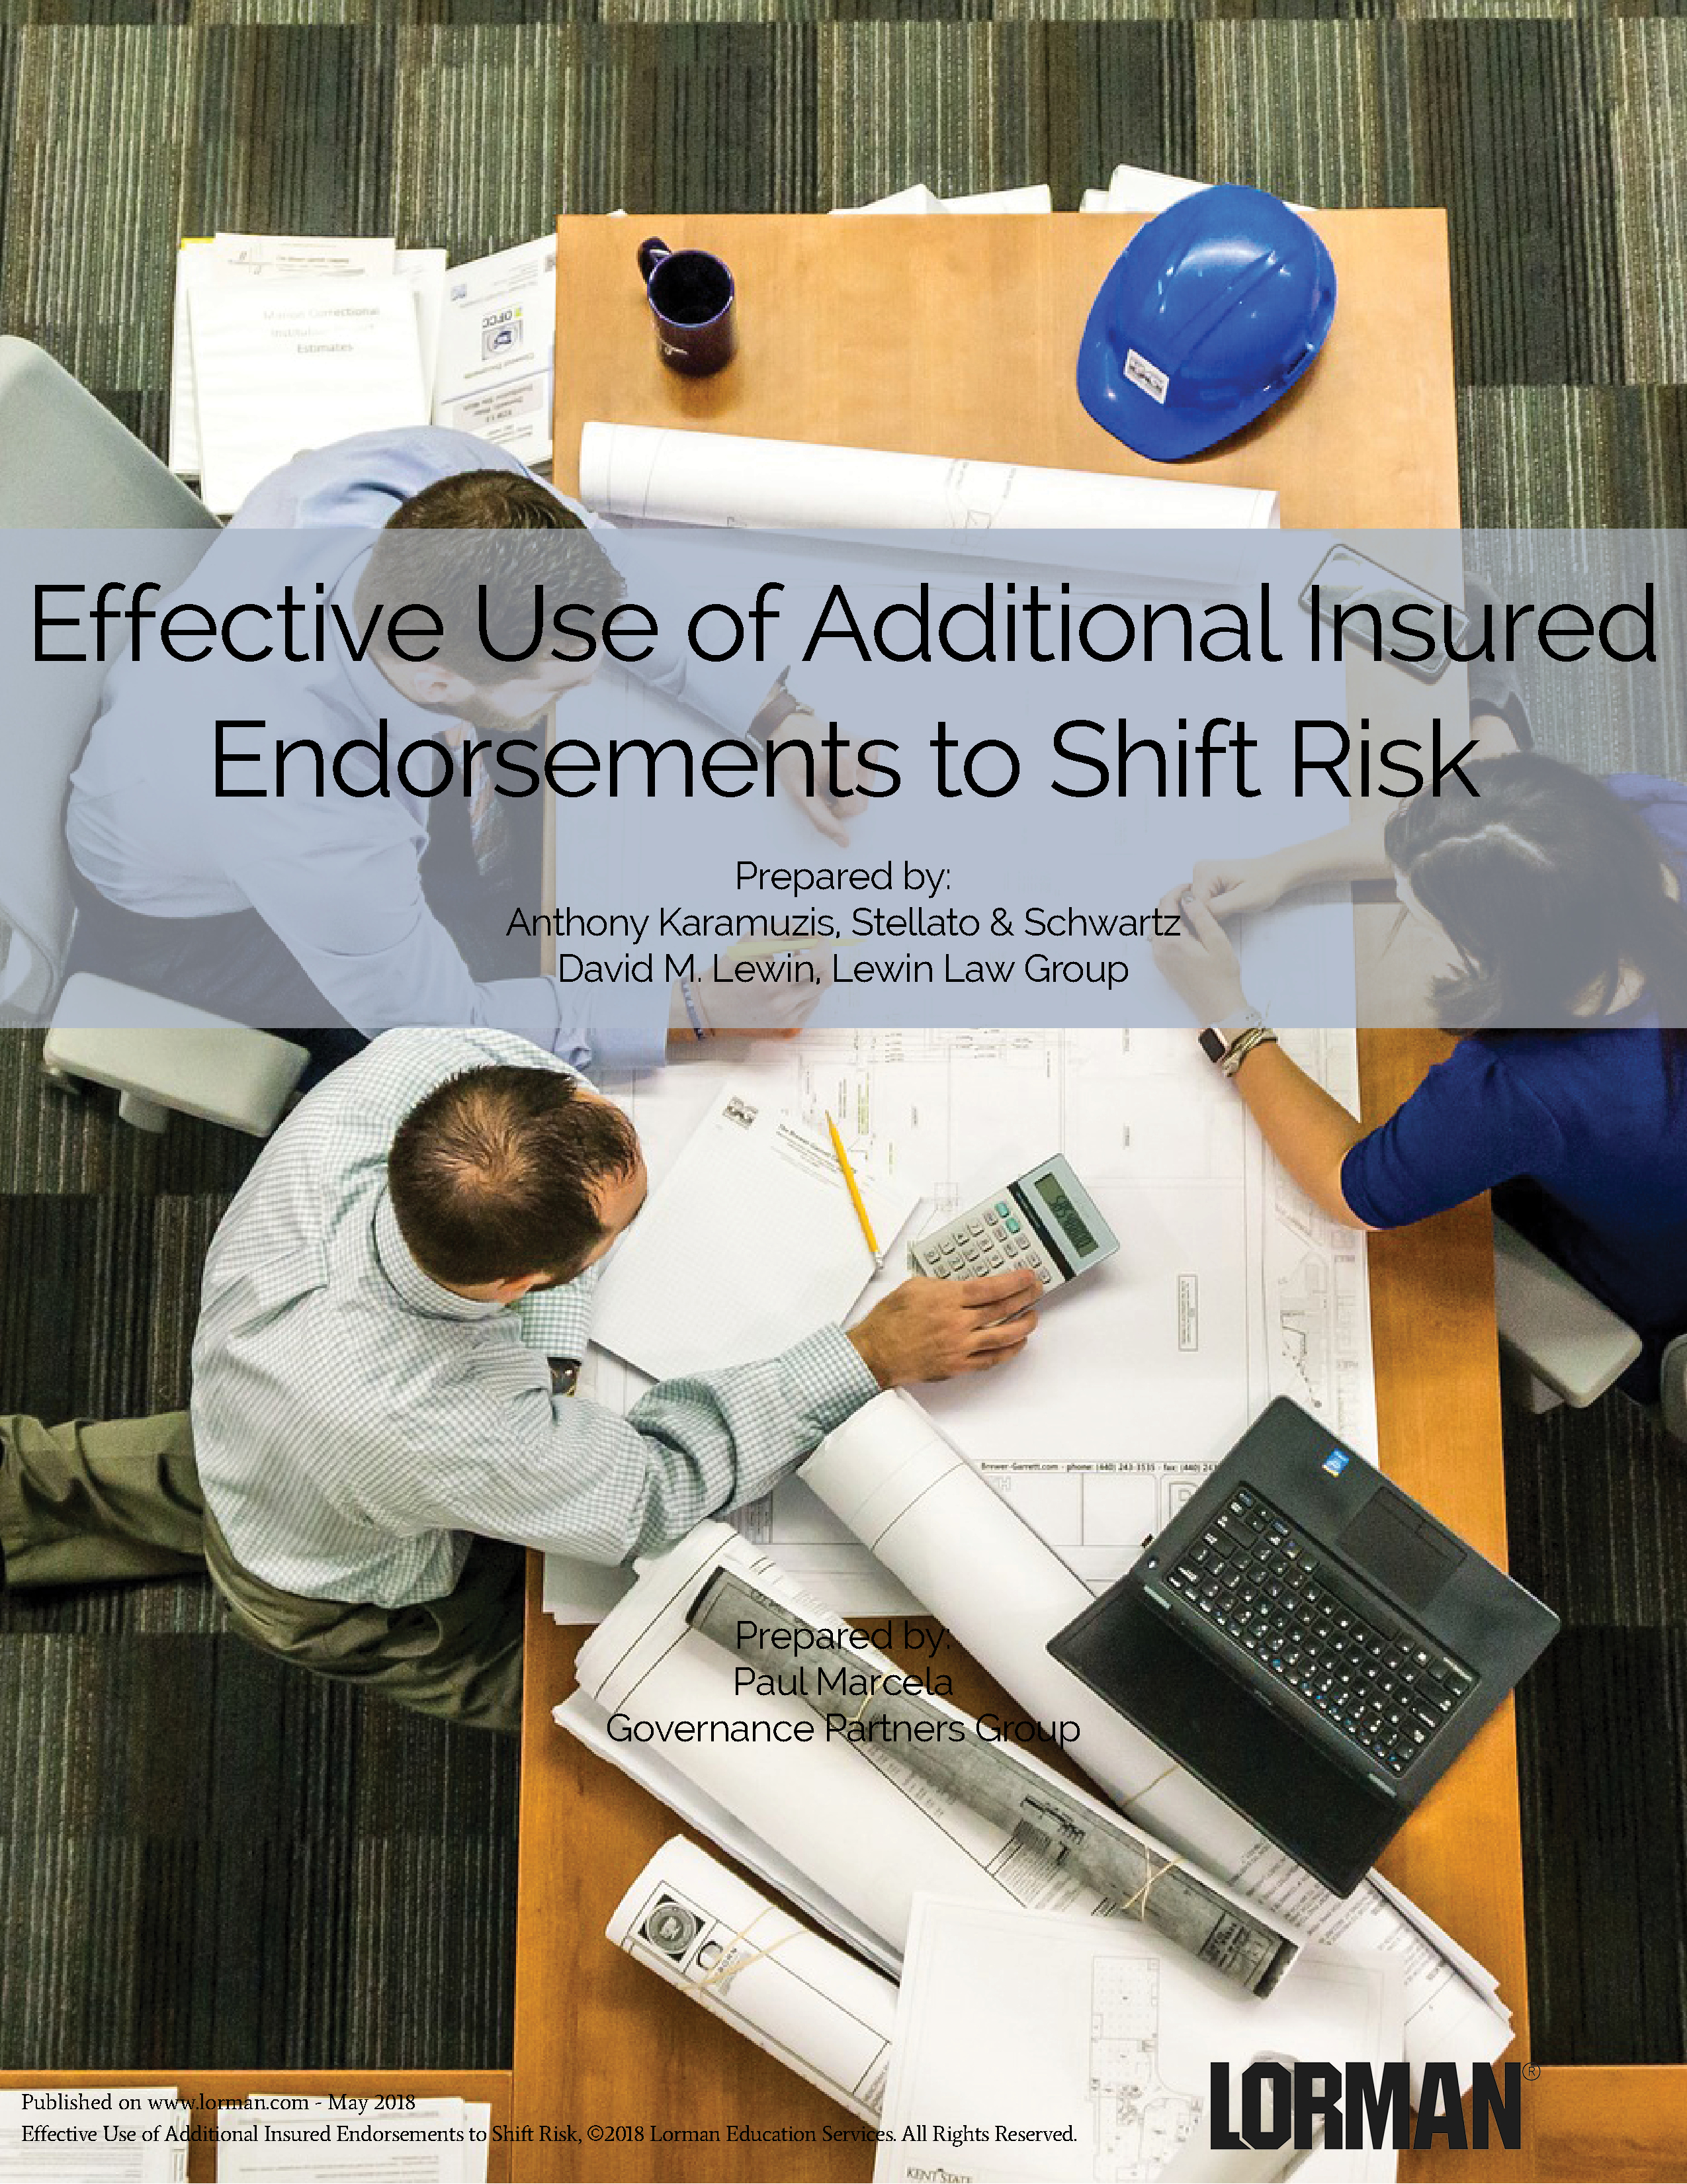 Effective Use of Additional Insured Endorsements to Shift Risk